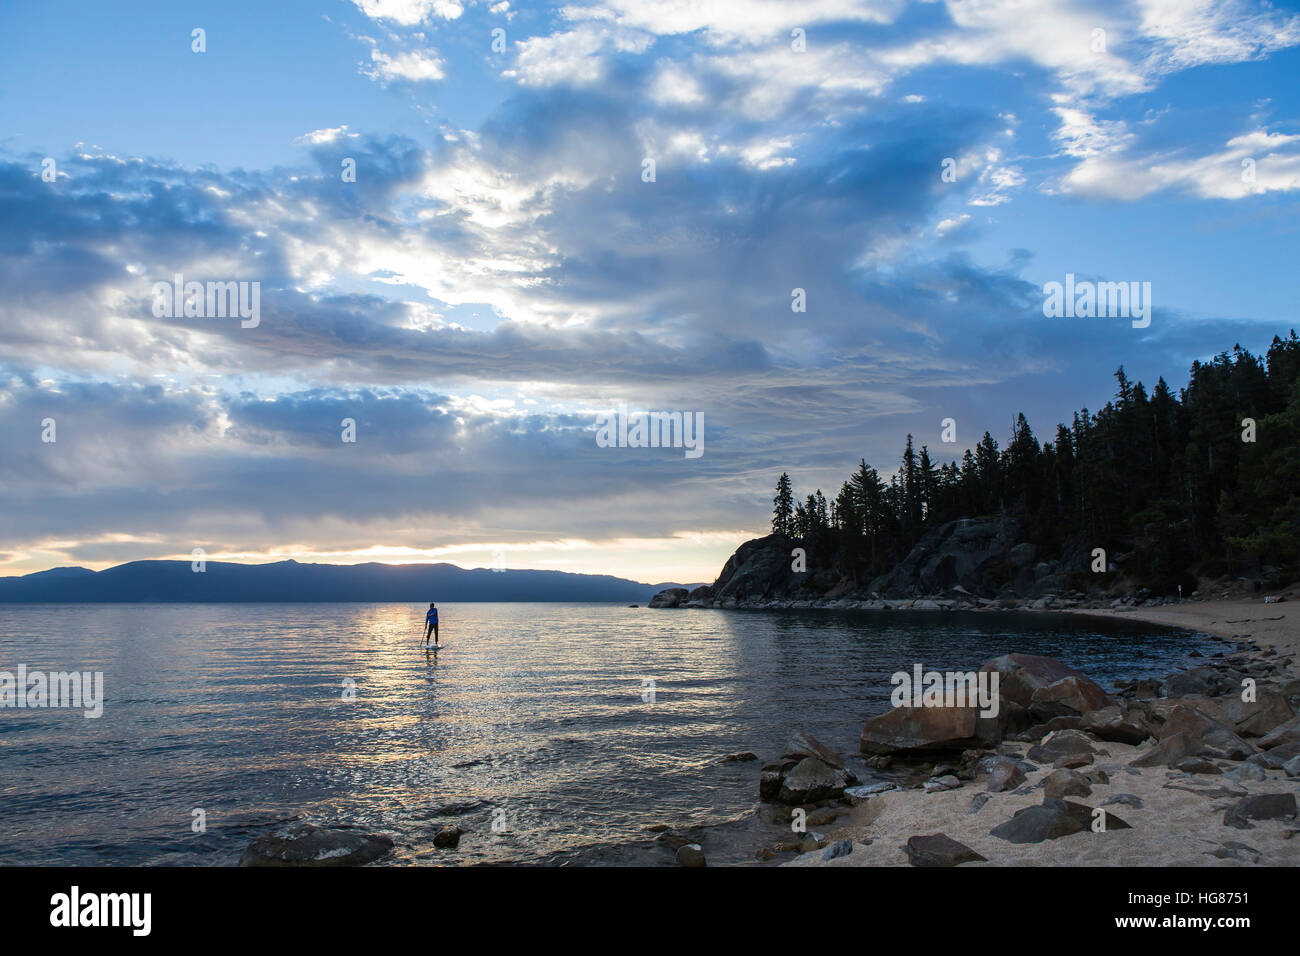 Distant view of man paddleboarding in lake against cloudy sky Stock Photo